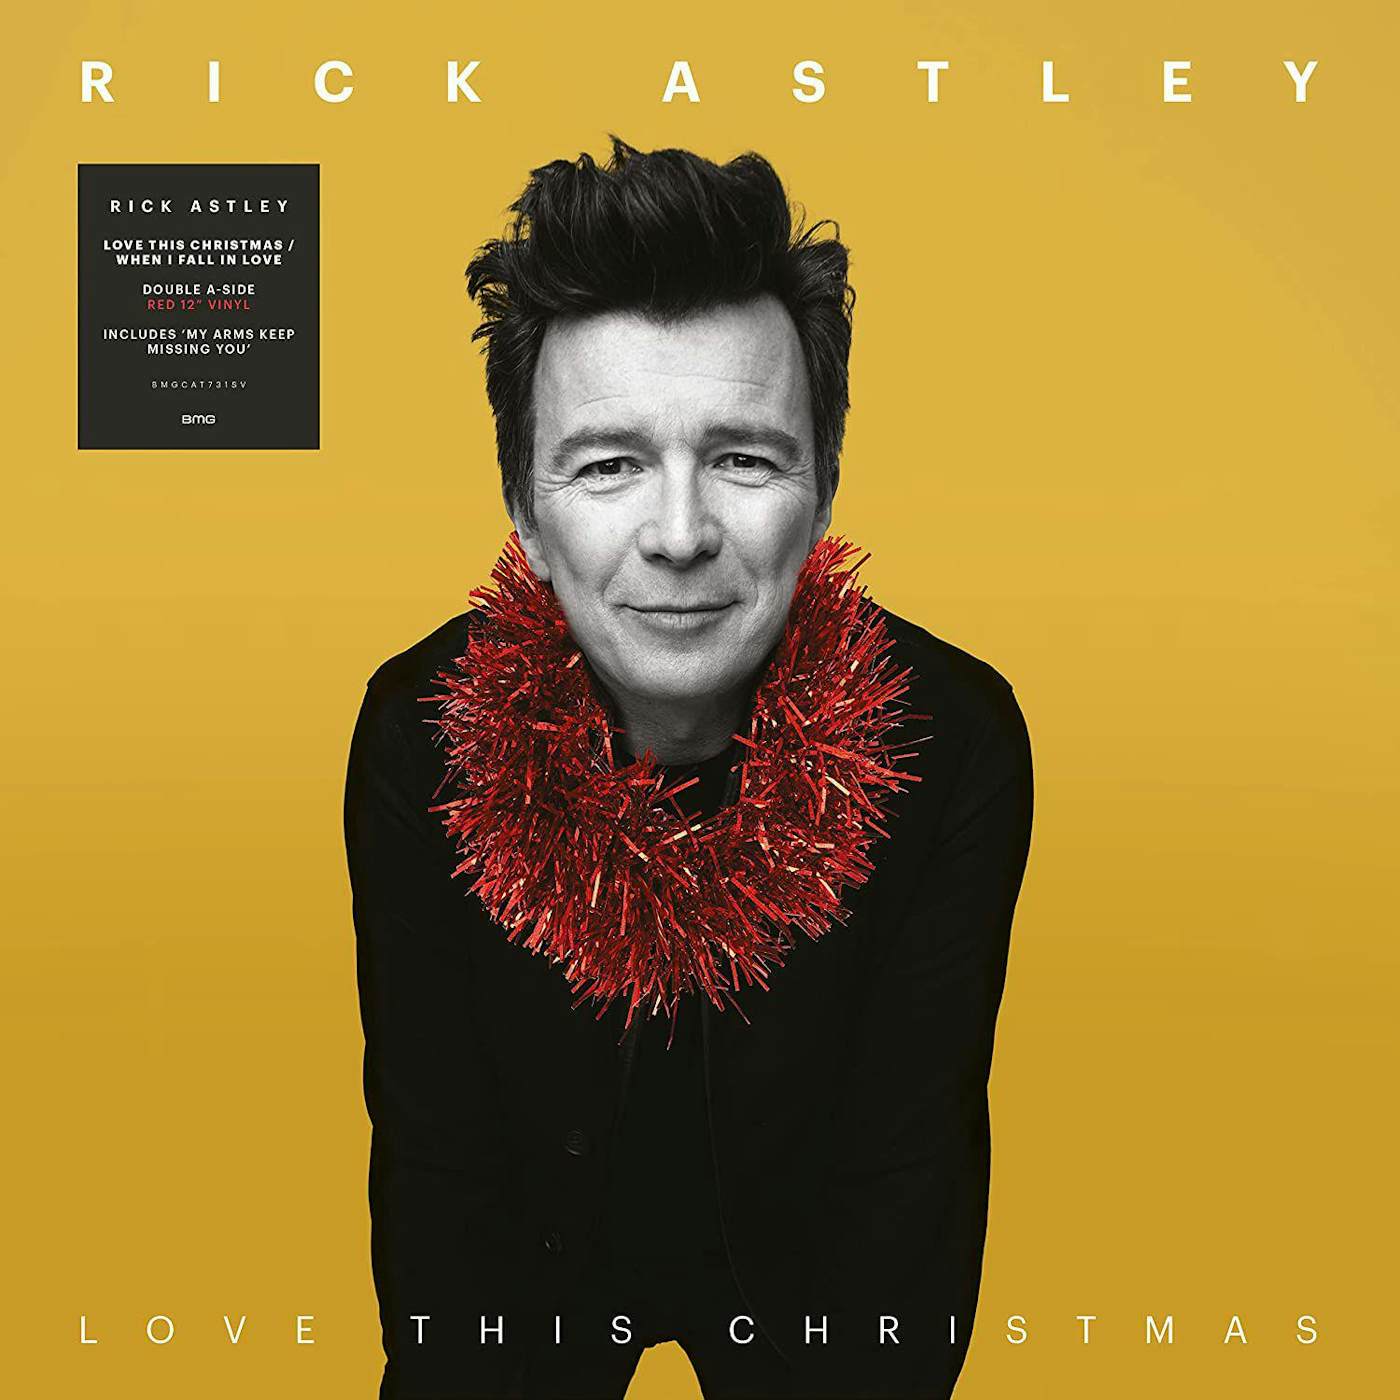 Rick Astley LOVE THIS CHRISTMAS / WHEN I FALL IN LOVE Vinyl Record